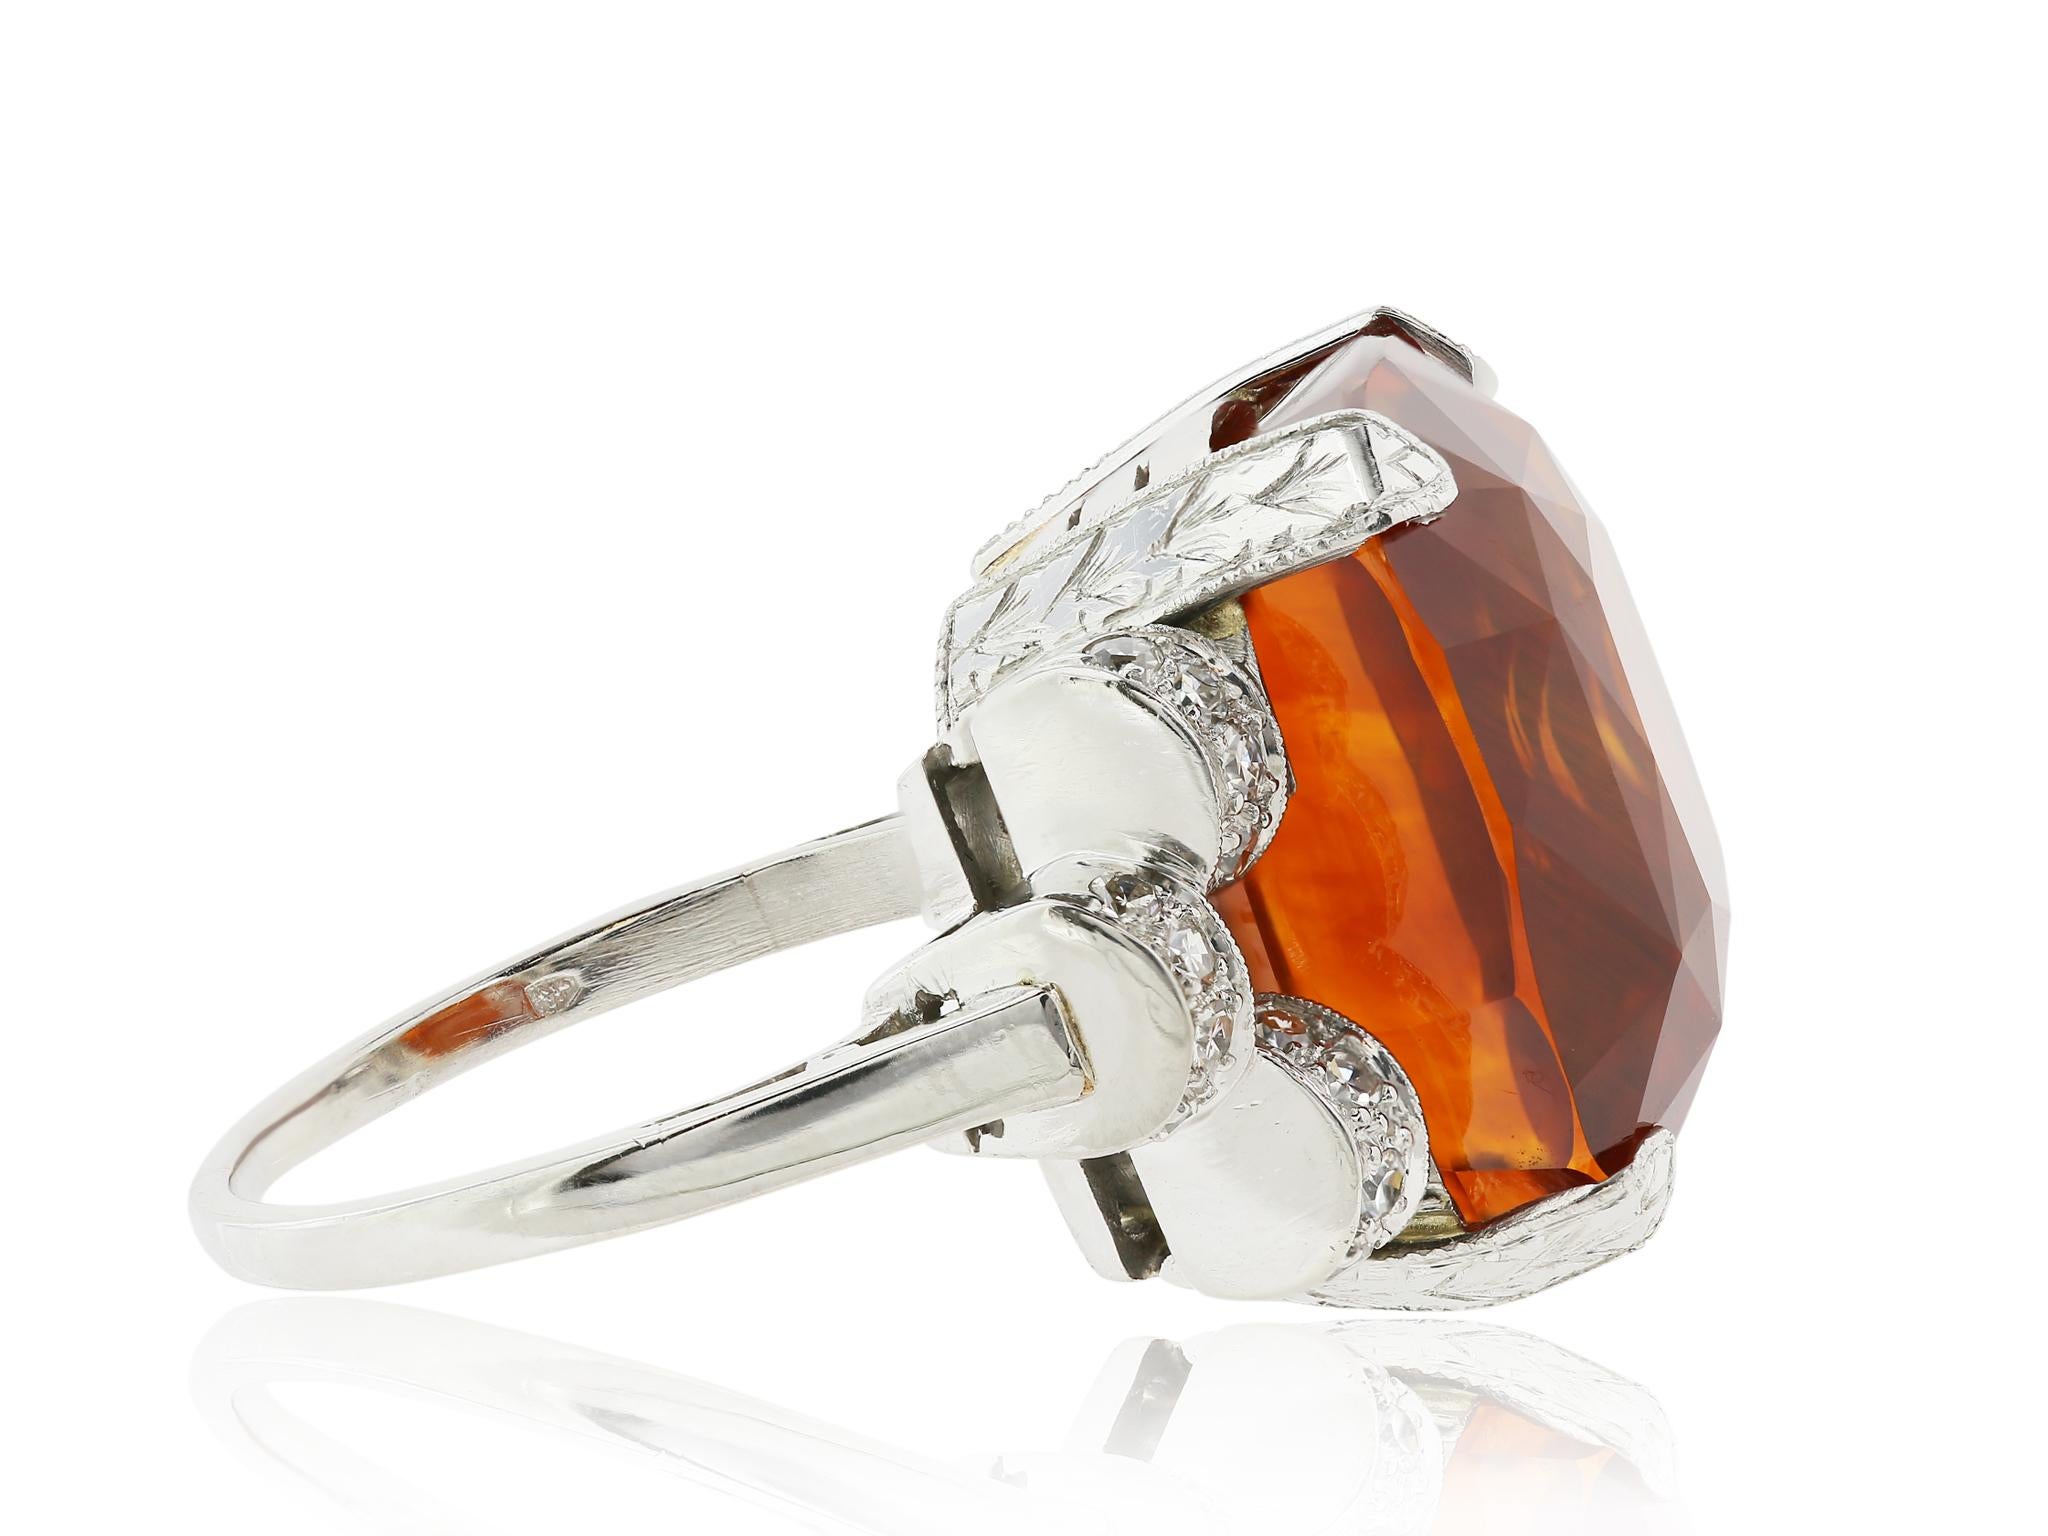 Platinum ladies ring with milgrain detail featuring one four prong-set 25.56 carat cushion modified brilliant-cut orange sapphire, flanked on either side by twelve bead-set single-cut diamond melee having a total approximate weight of 0.50 carat.